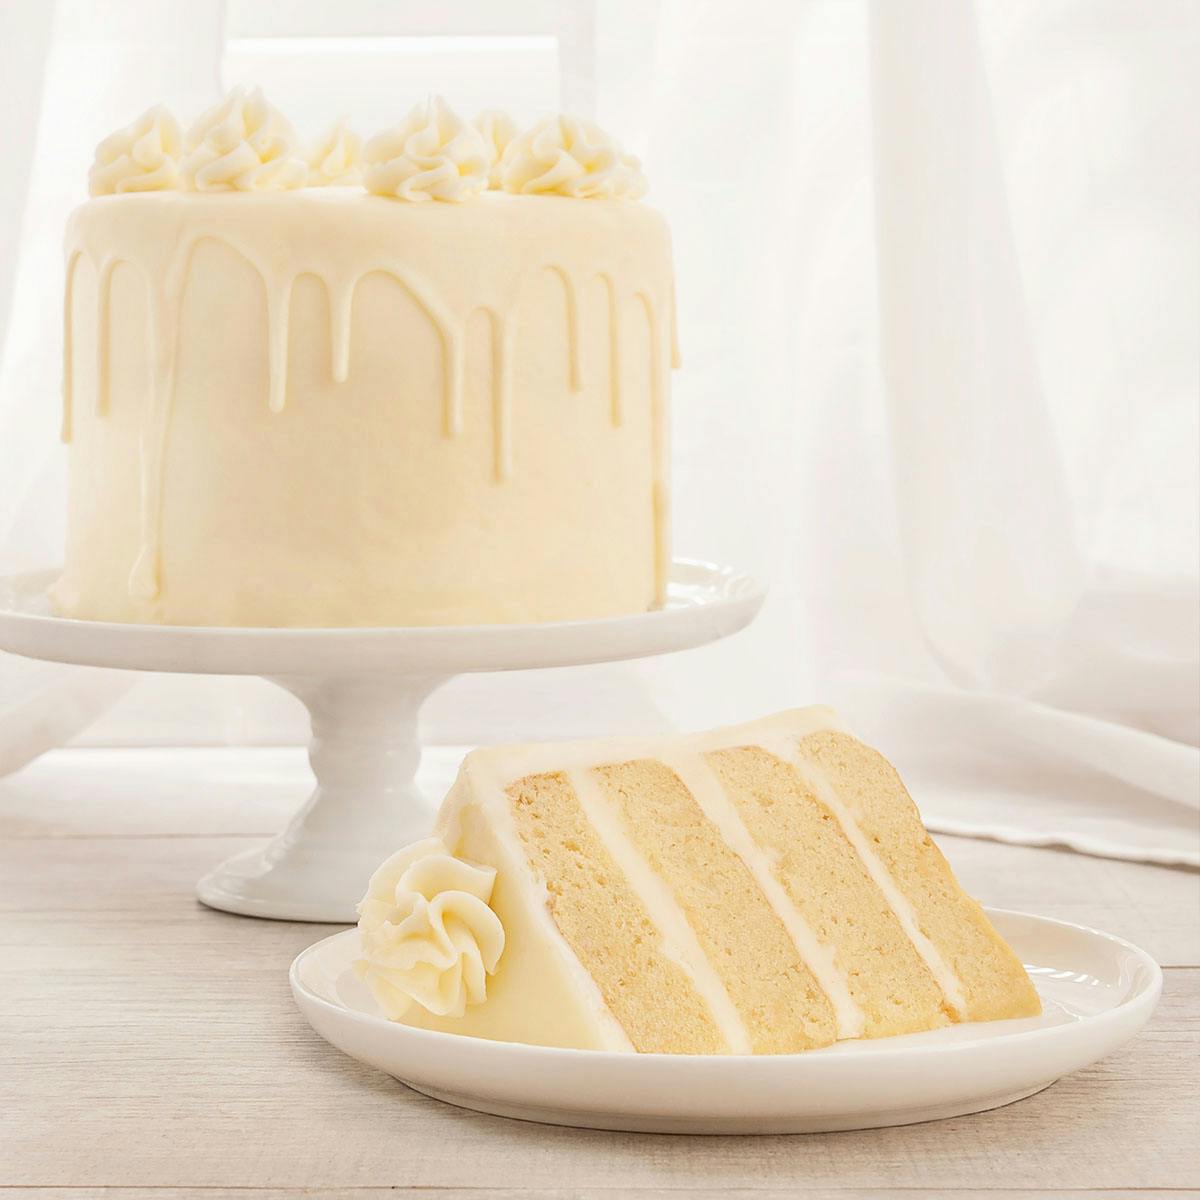 The Pastry Chef's Baking: Buttercup Golden Layer Cake